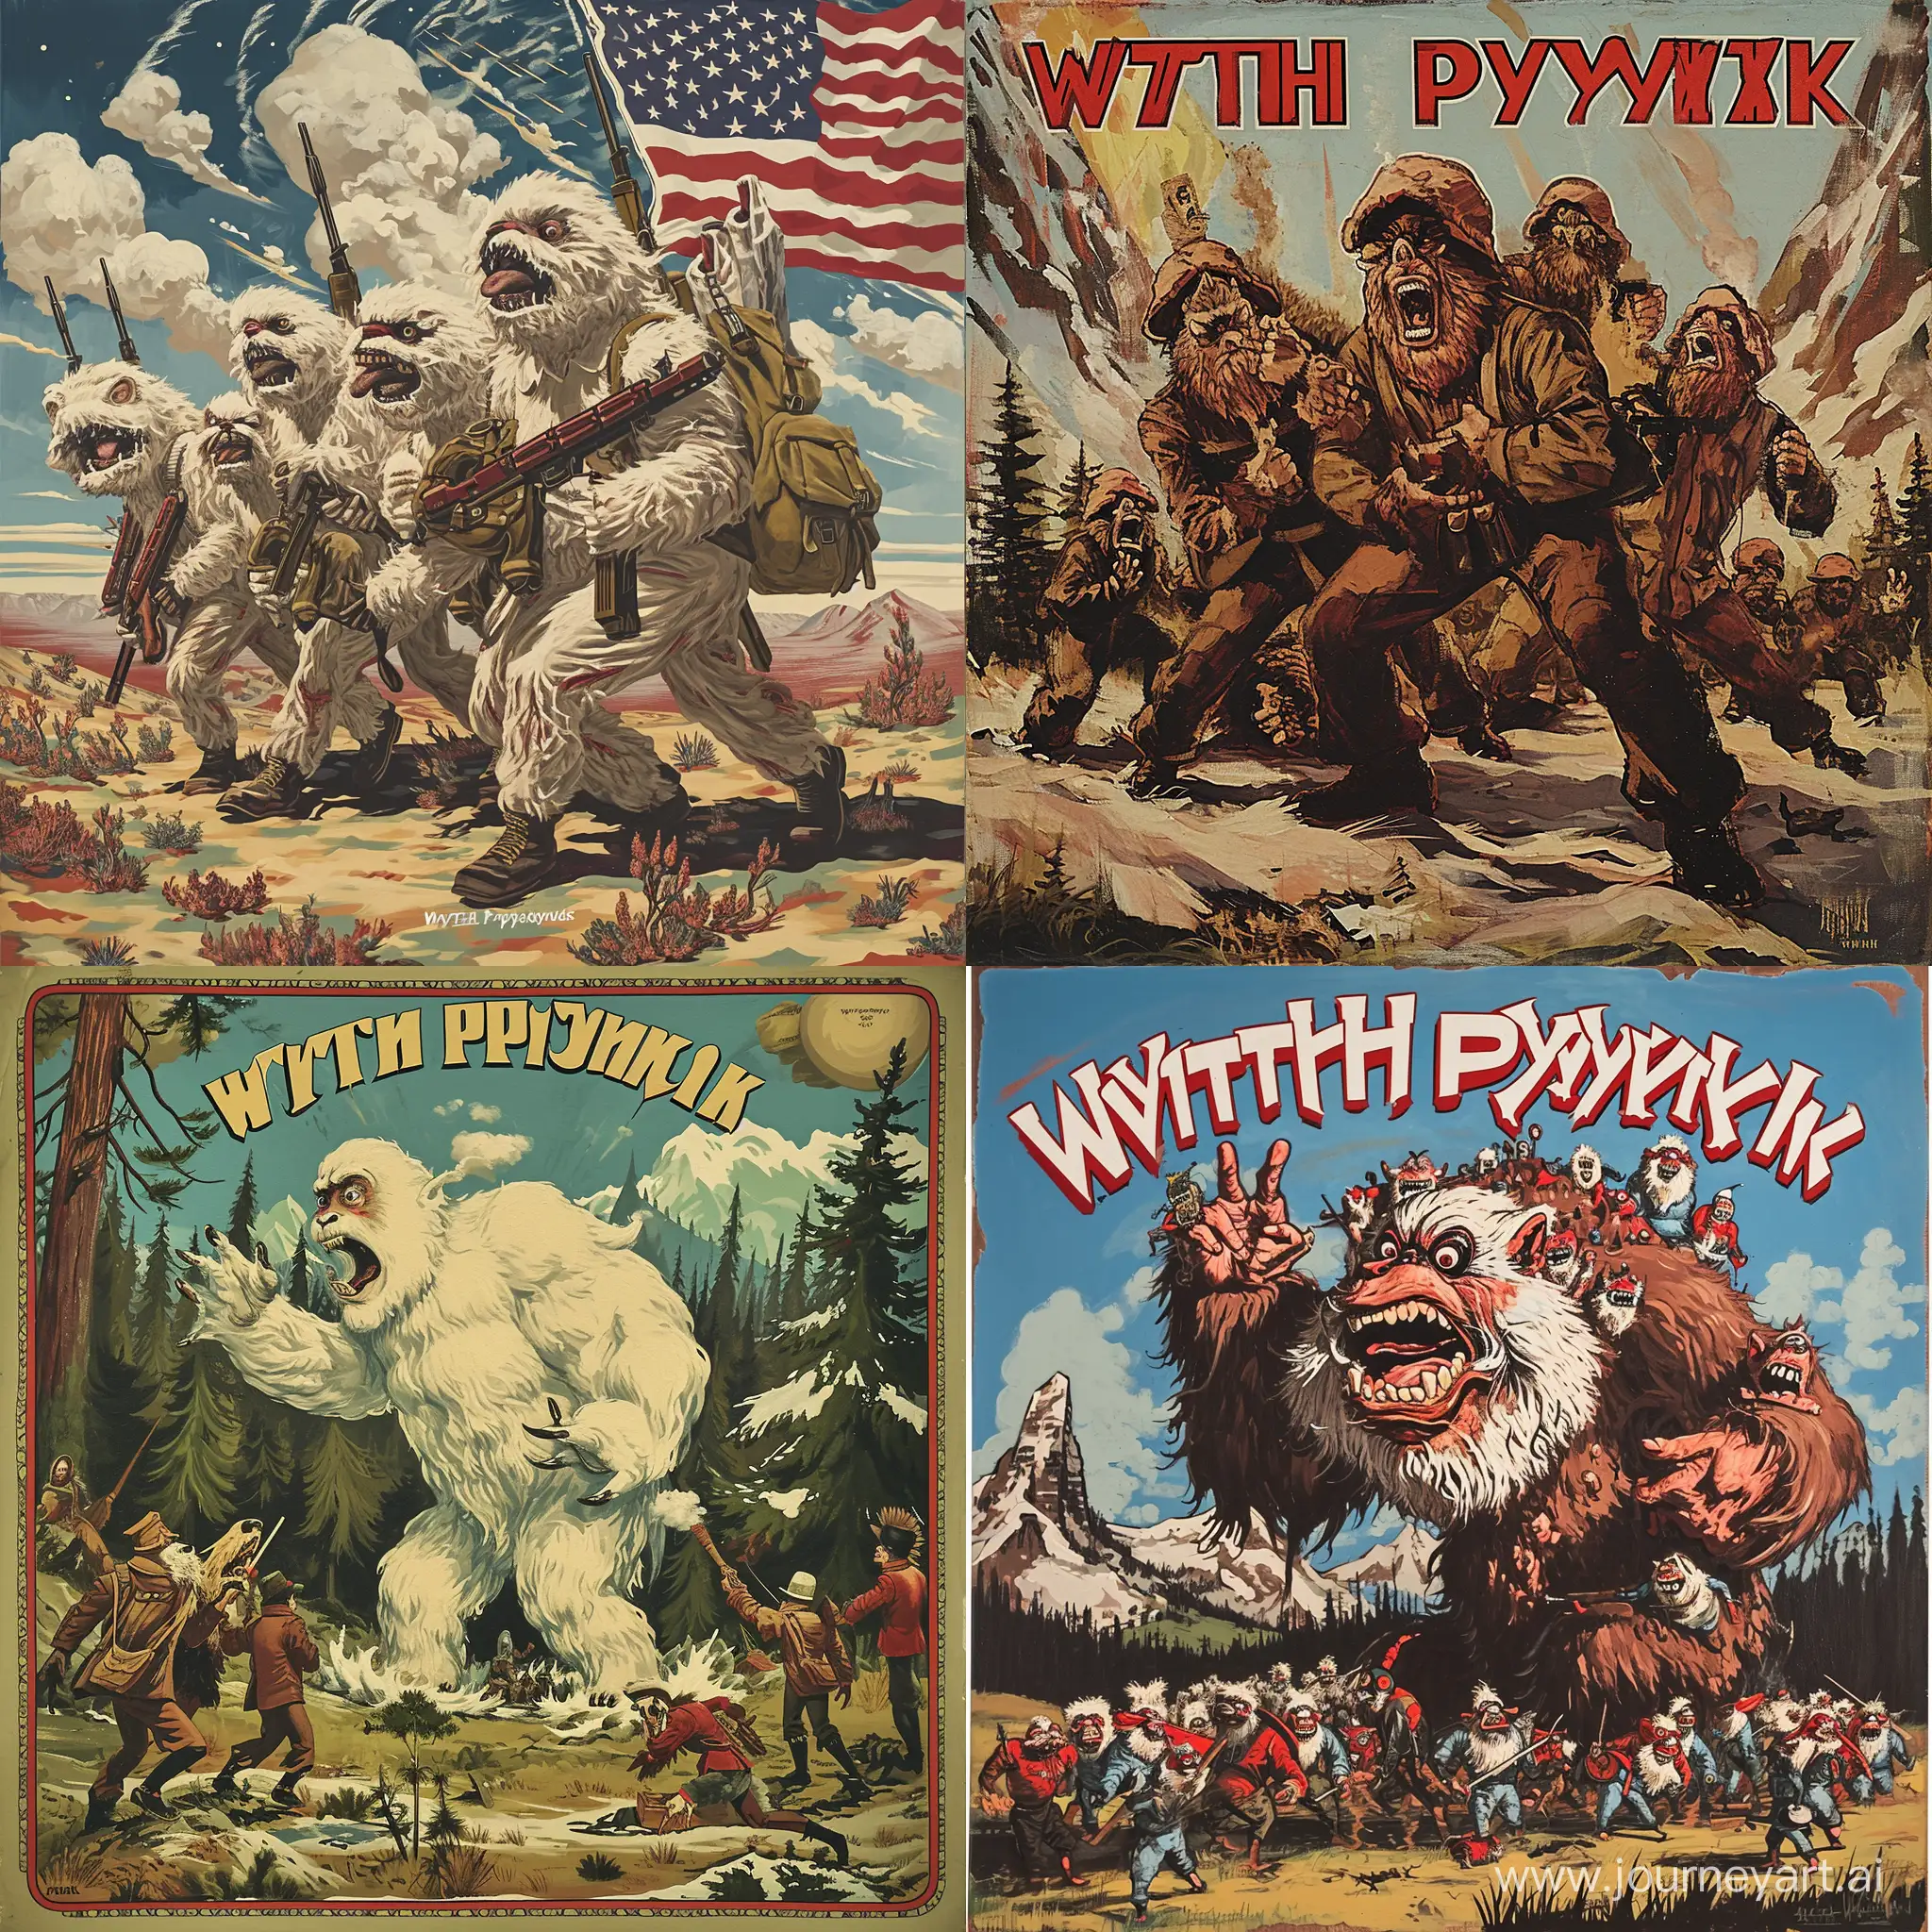 an album cover with the exact words "wytch pycknyck", the album is about an army of yeti invading north america, like a 30s comic, painted